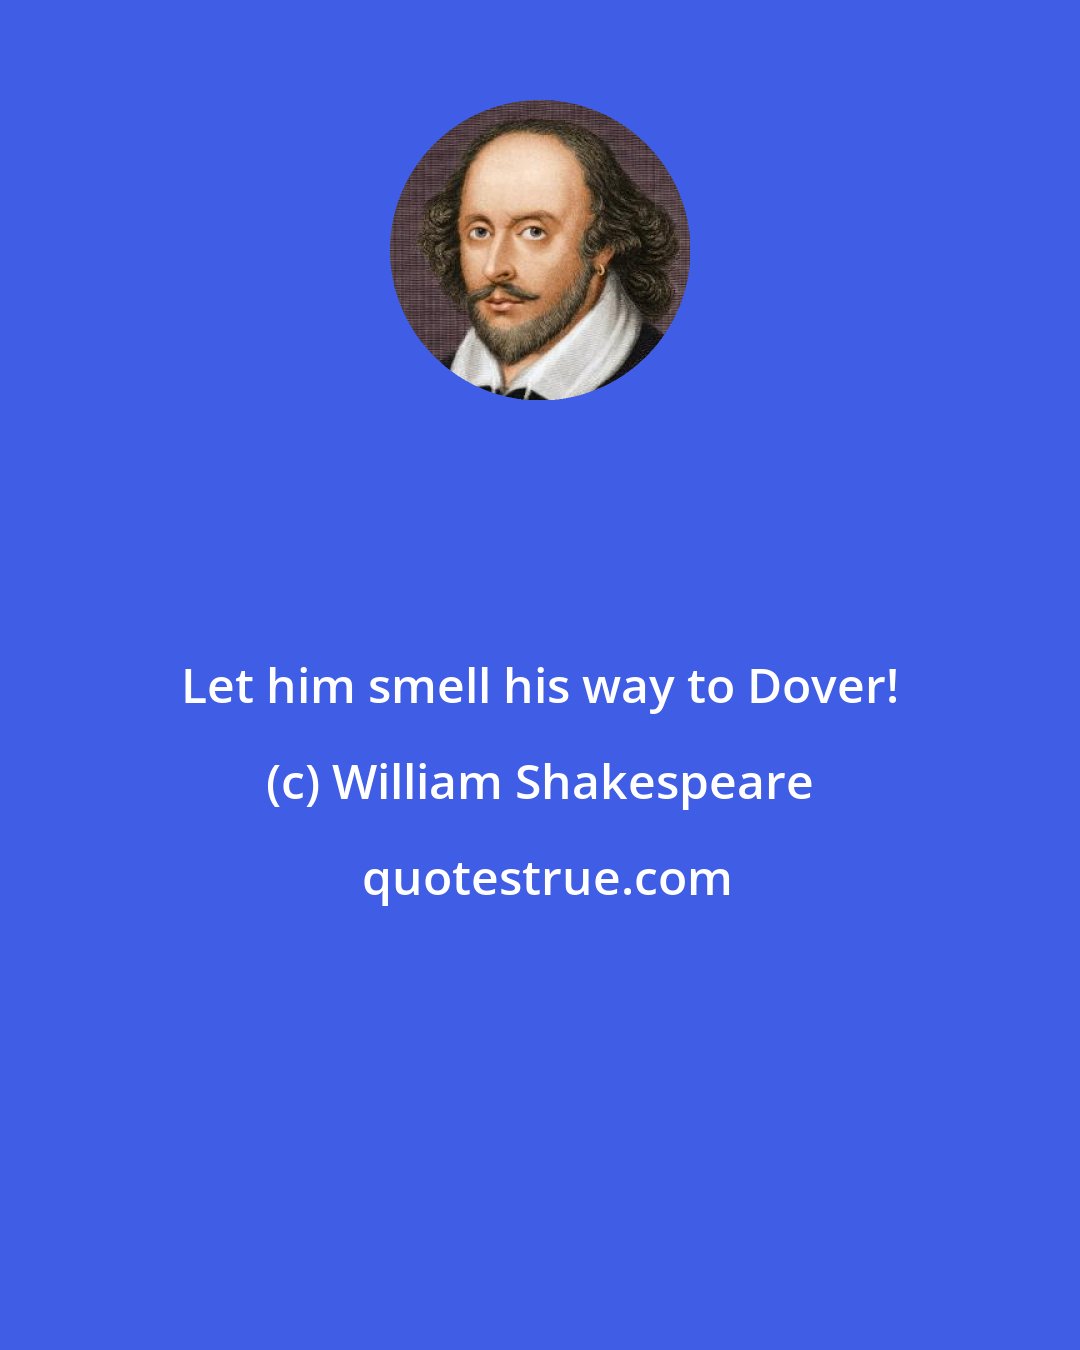 William Shakespeare: Let him smell his way to Dover!